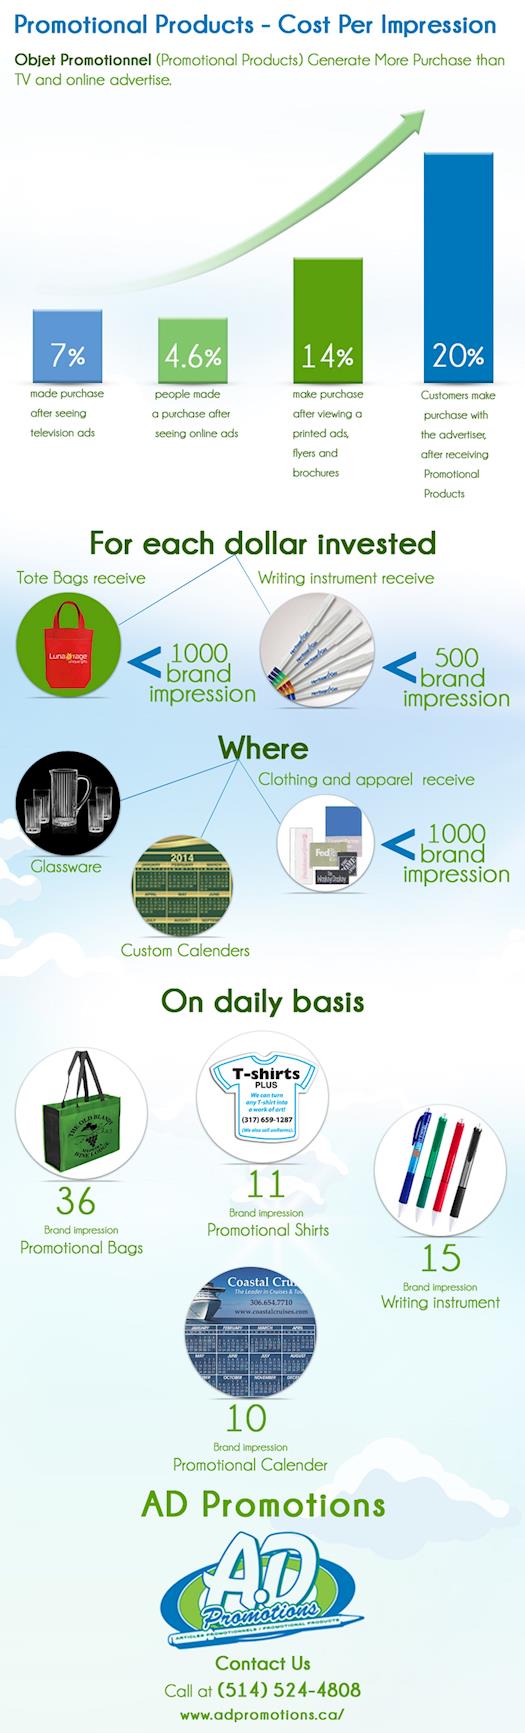 Promotional Products - Cost Per Impression!